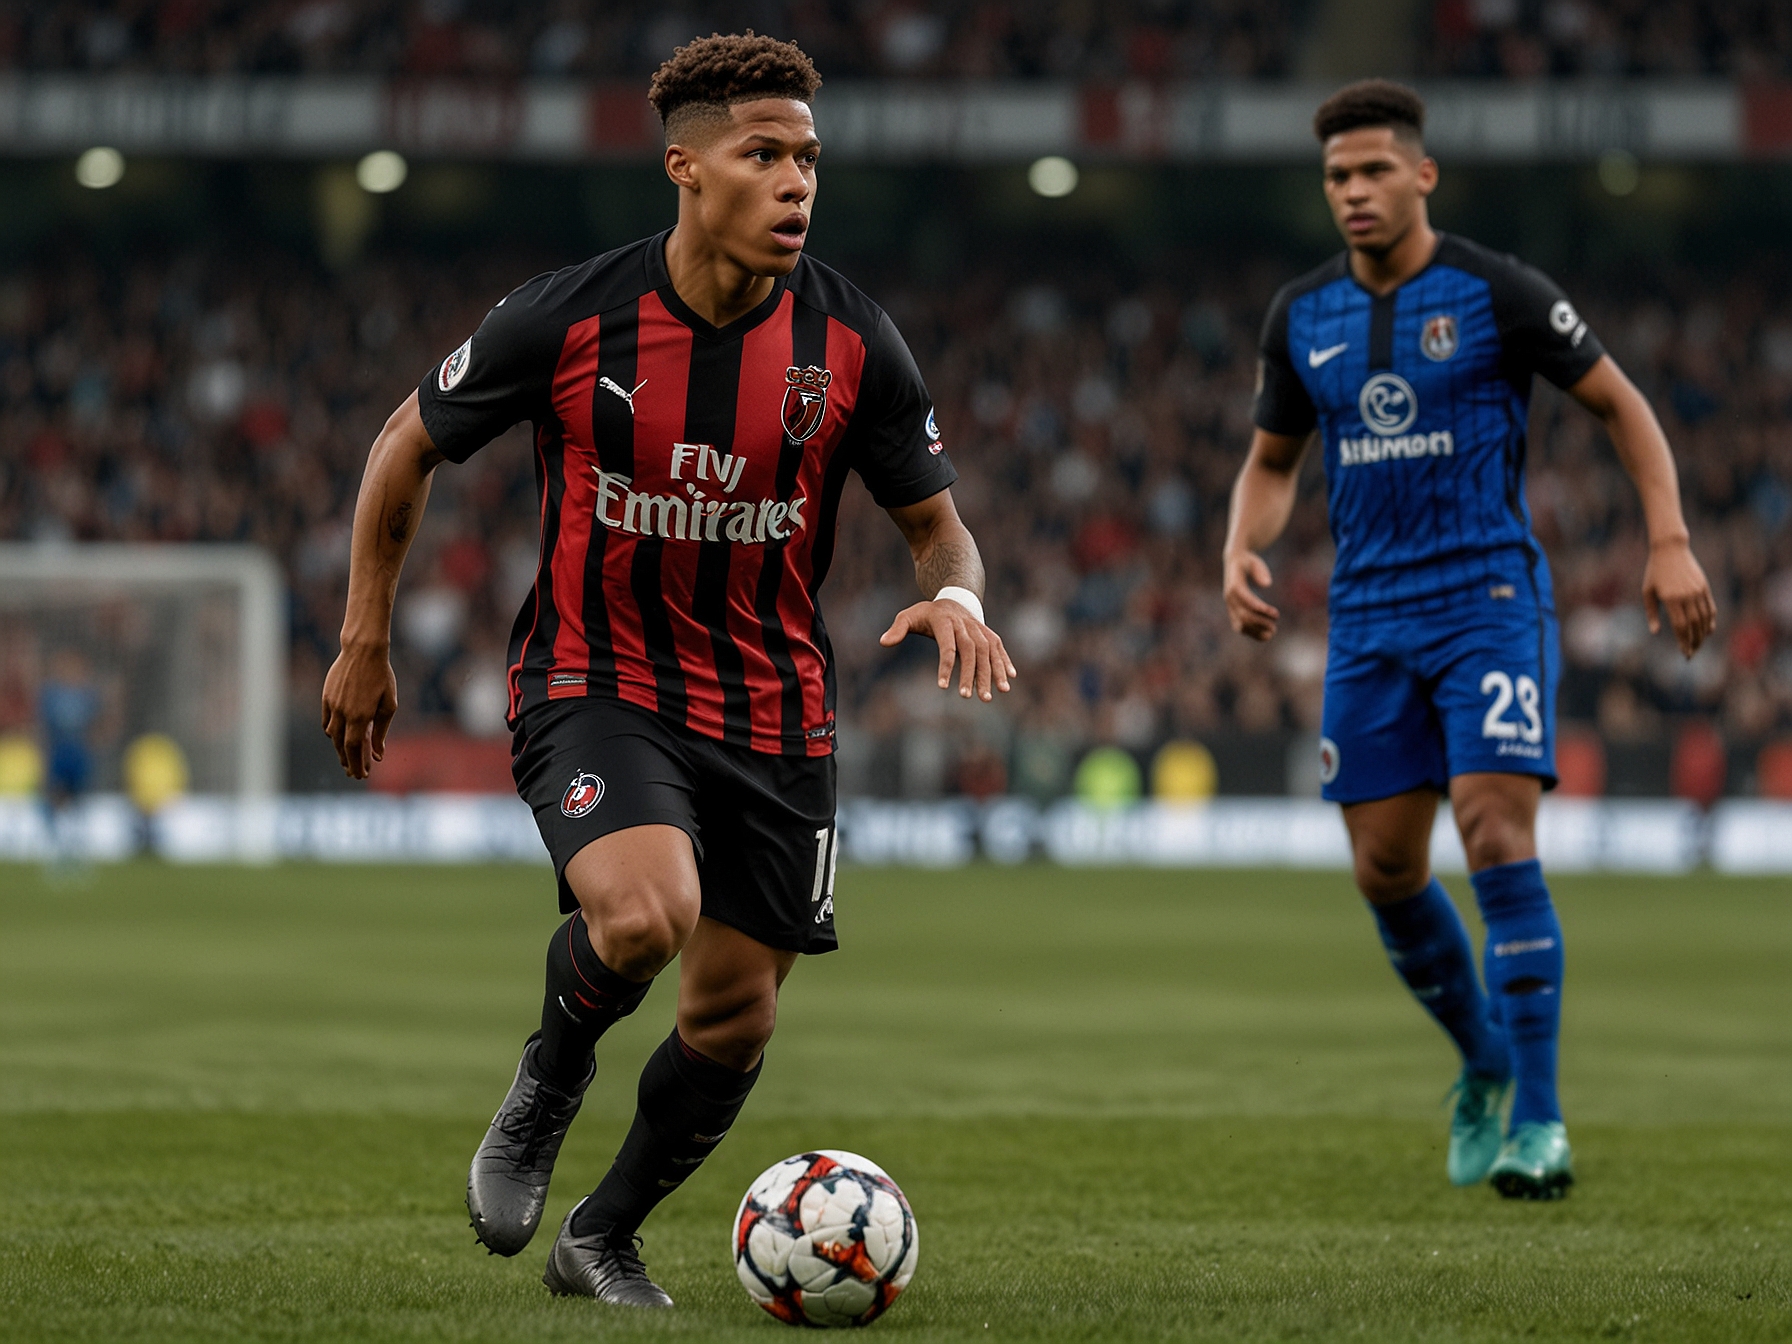 Jean-Clair Todibo on the pitch playing for OGC Nice, showcasing his defensive skills and tactical intelligence, attributes that have attracted interest from Manchester United.